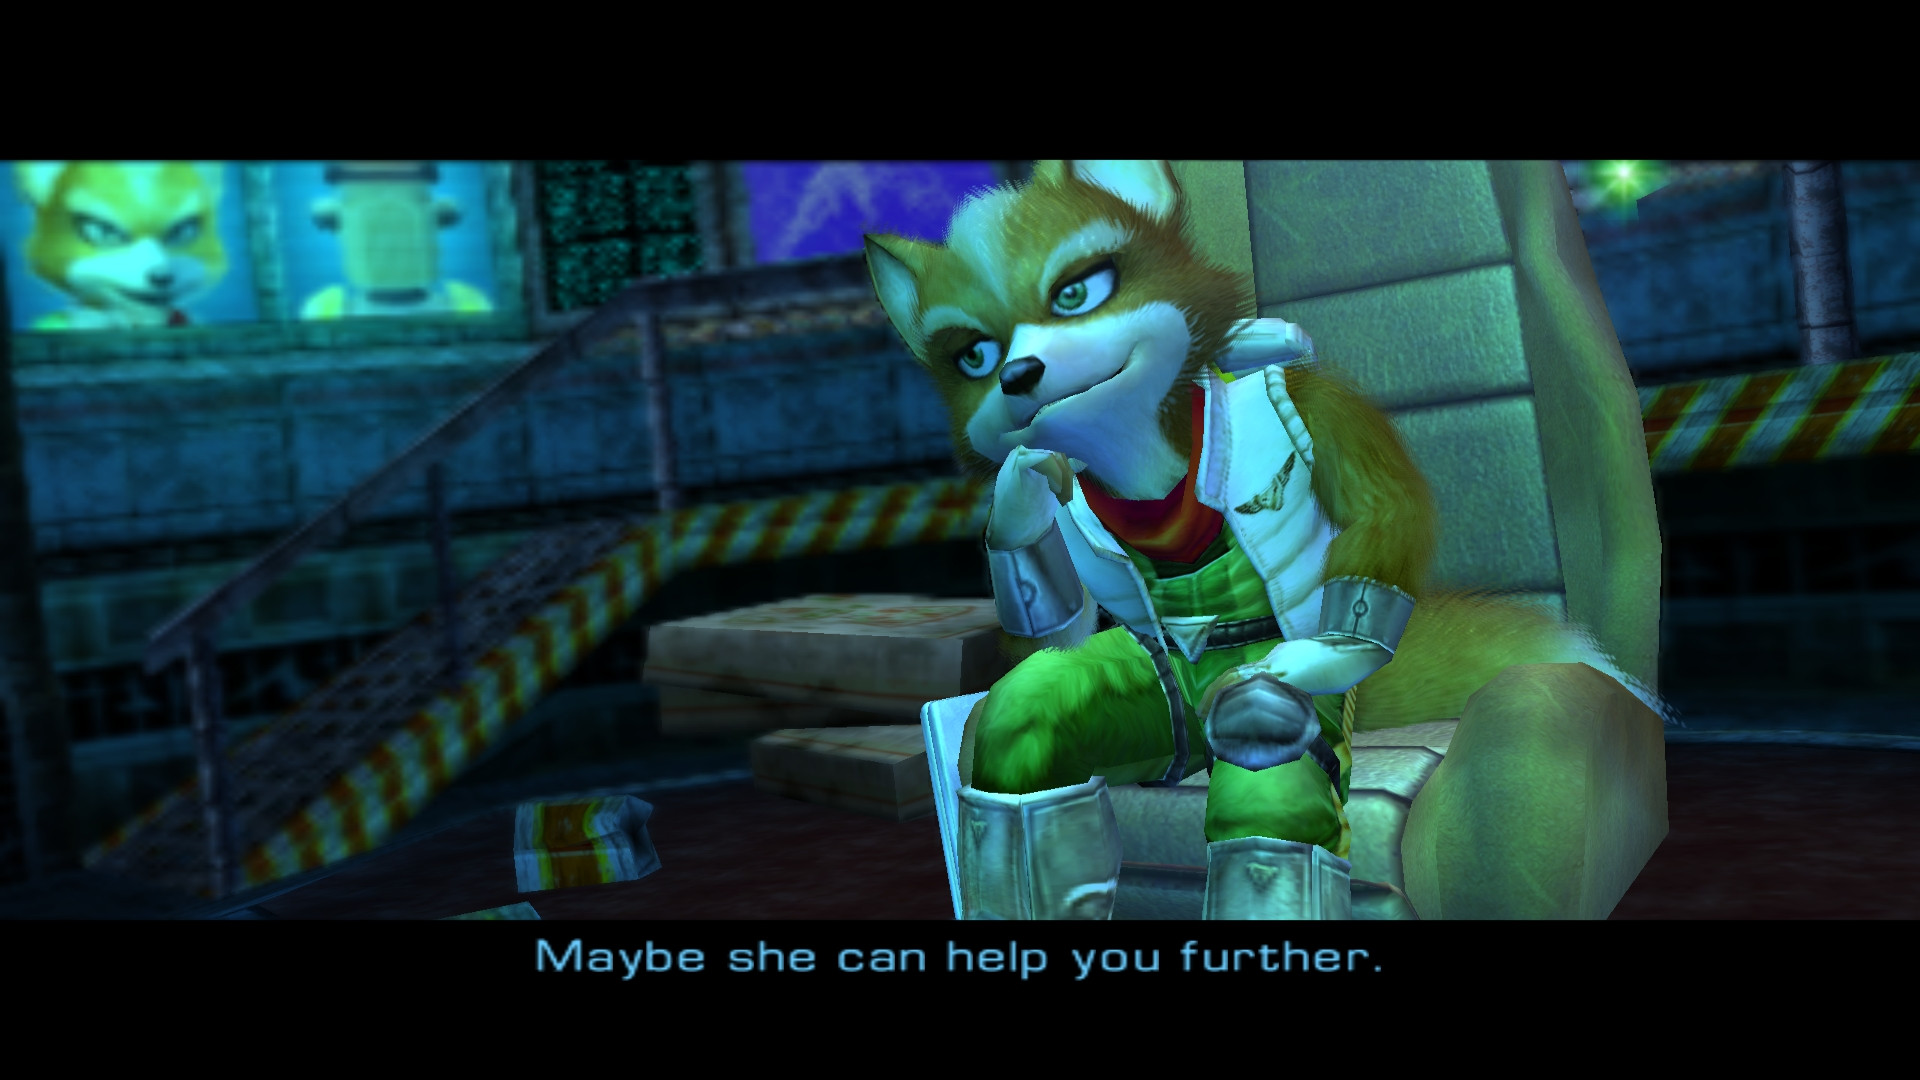 Unreleased Wii U game Star Fox Armada would have featured puppet